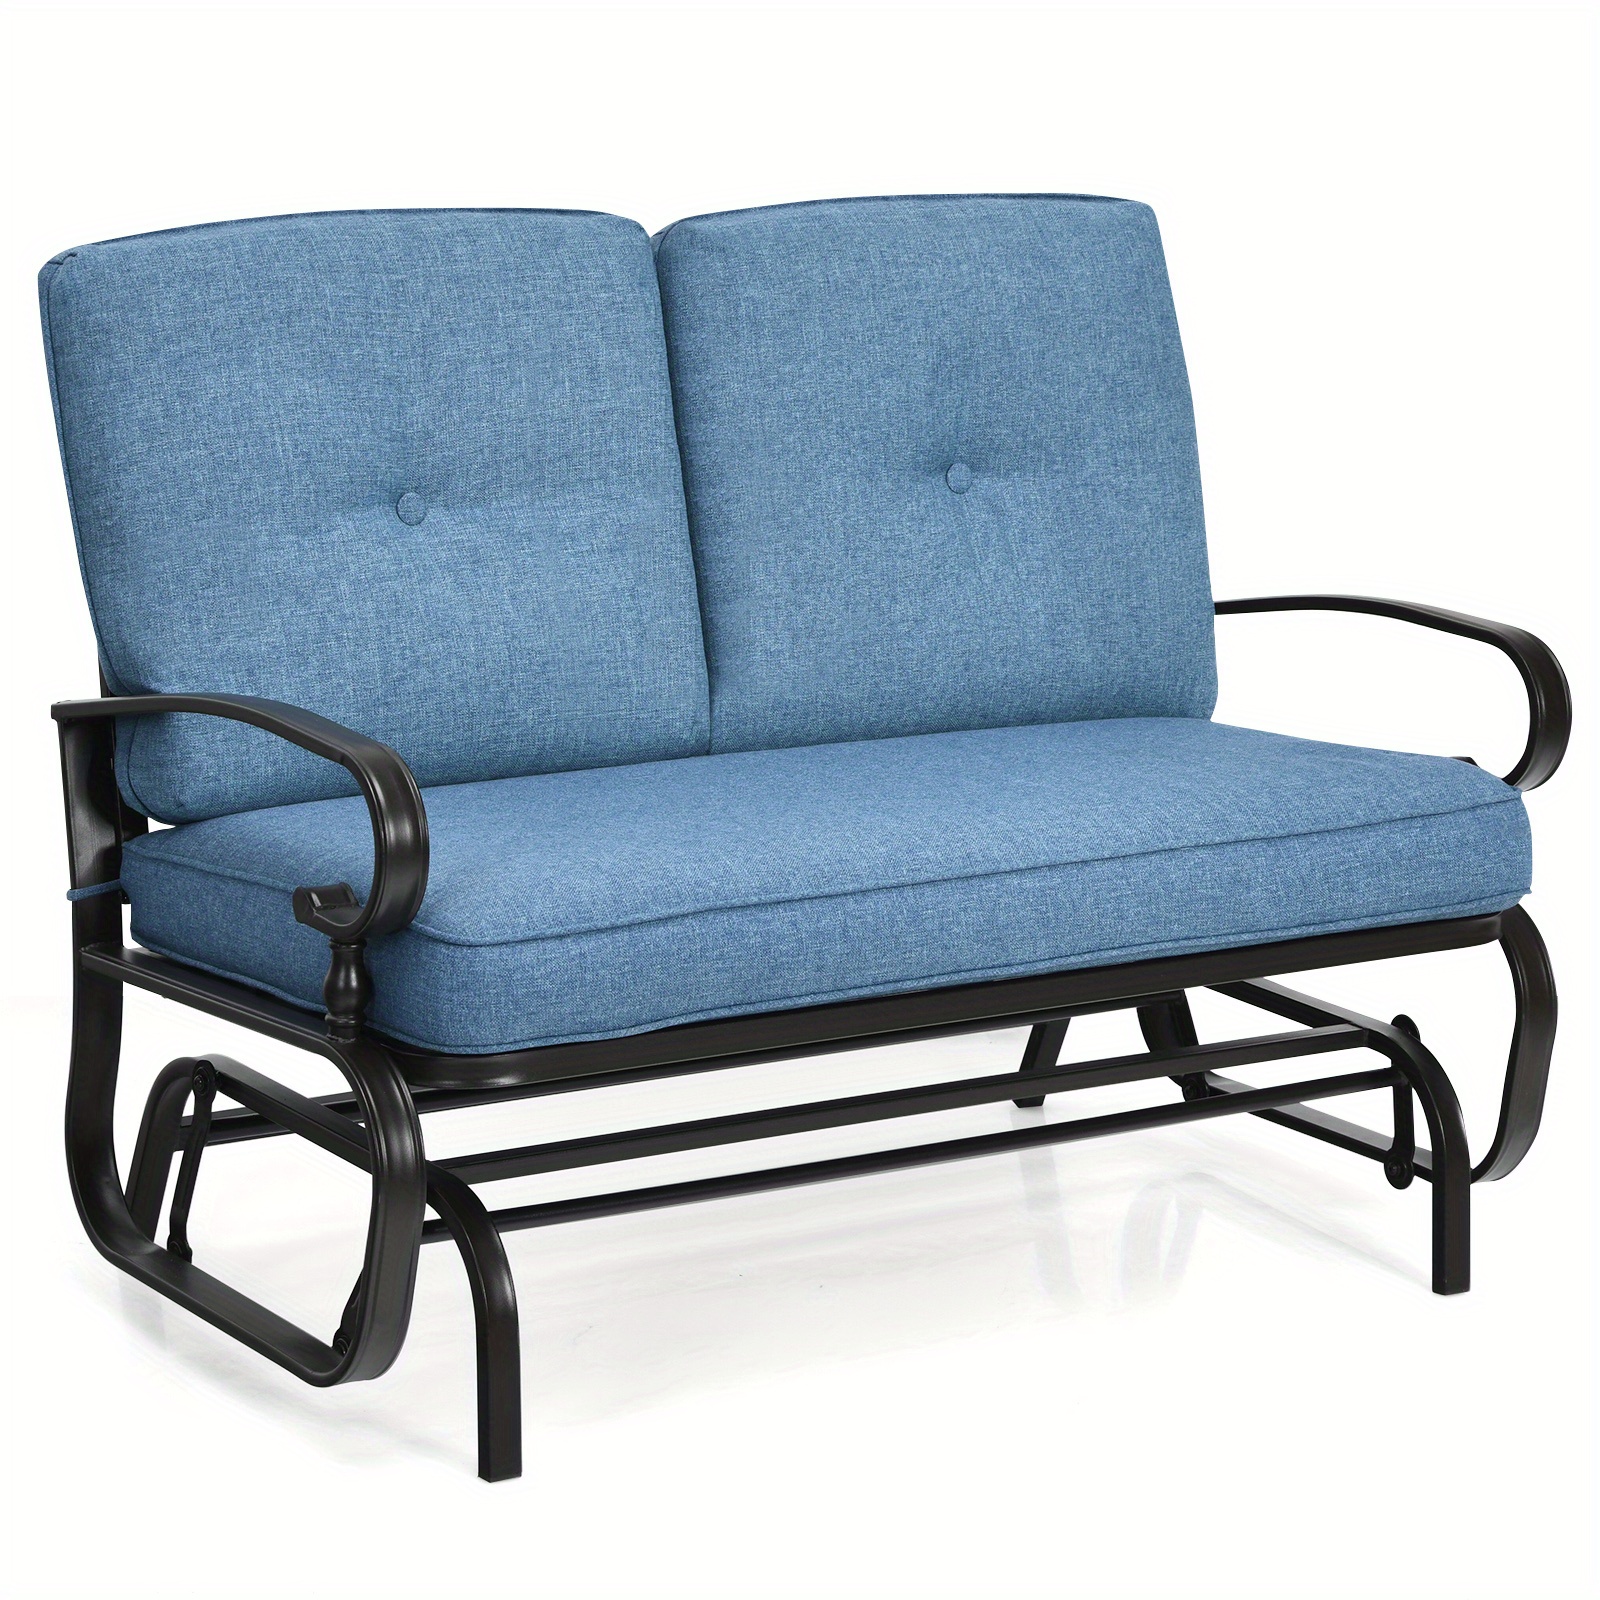 

Lifezeal 2-person Outdoor Swing Glider Chair Bench Loveseat Cushioned Sofa Blue